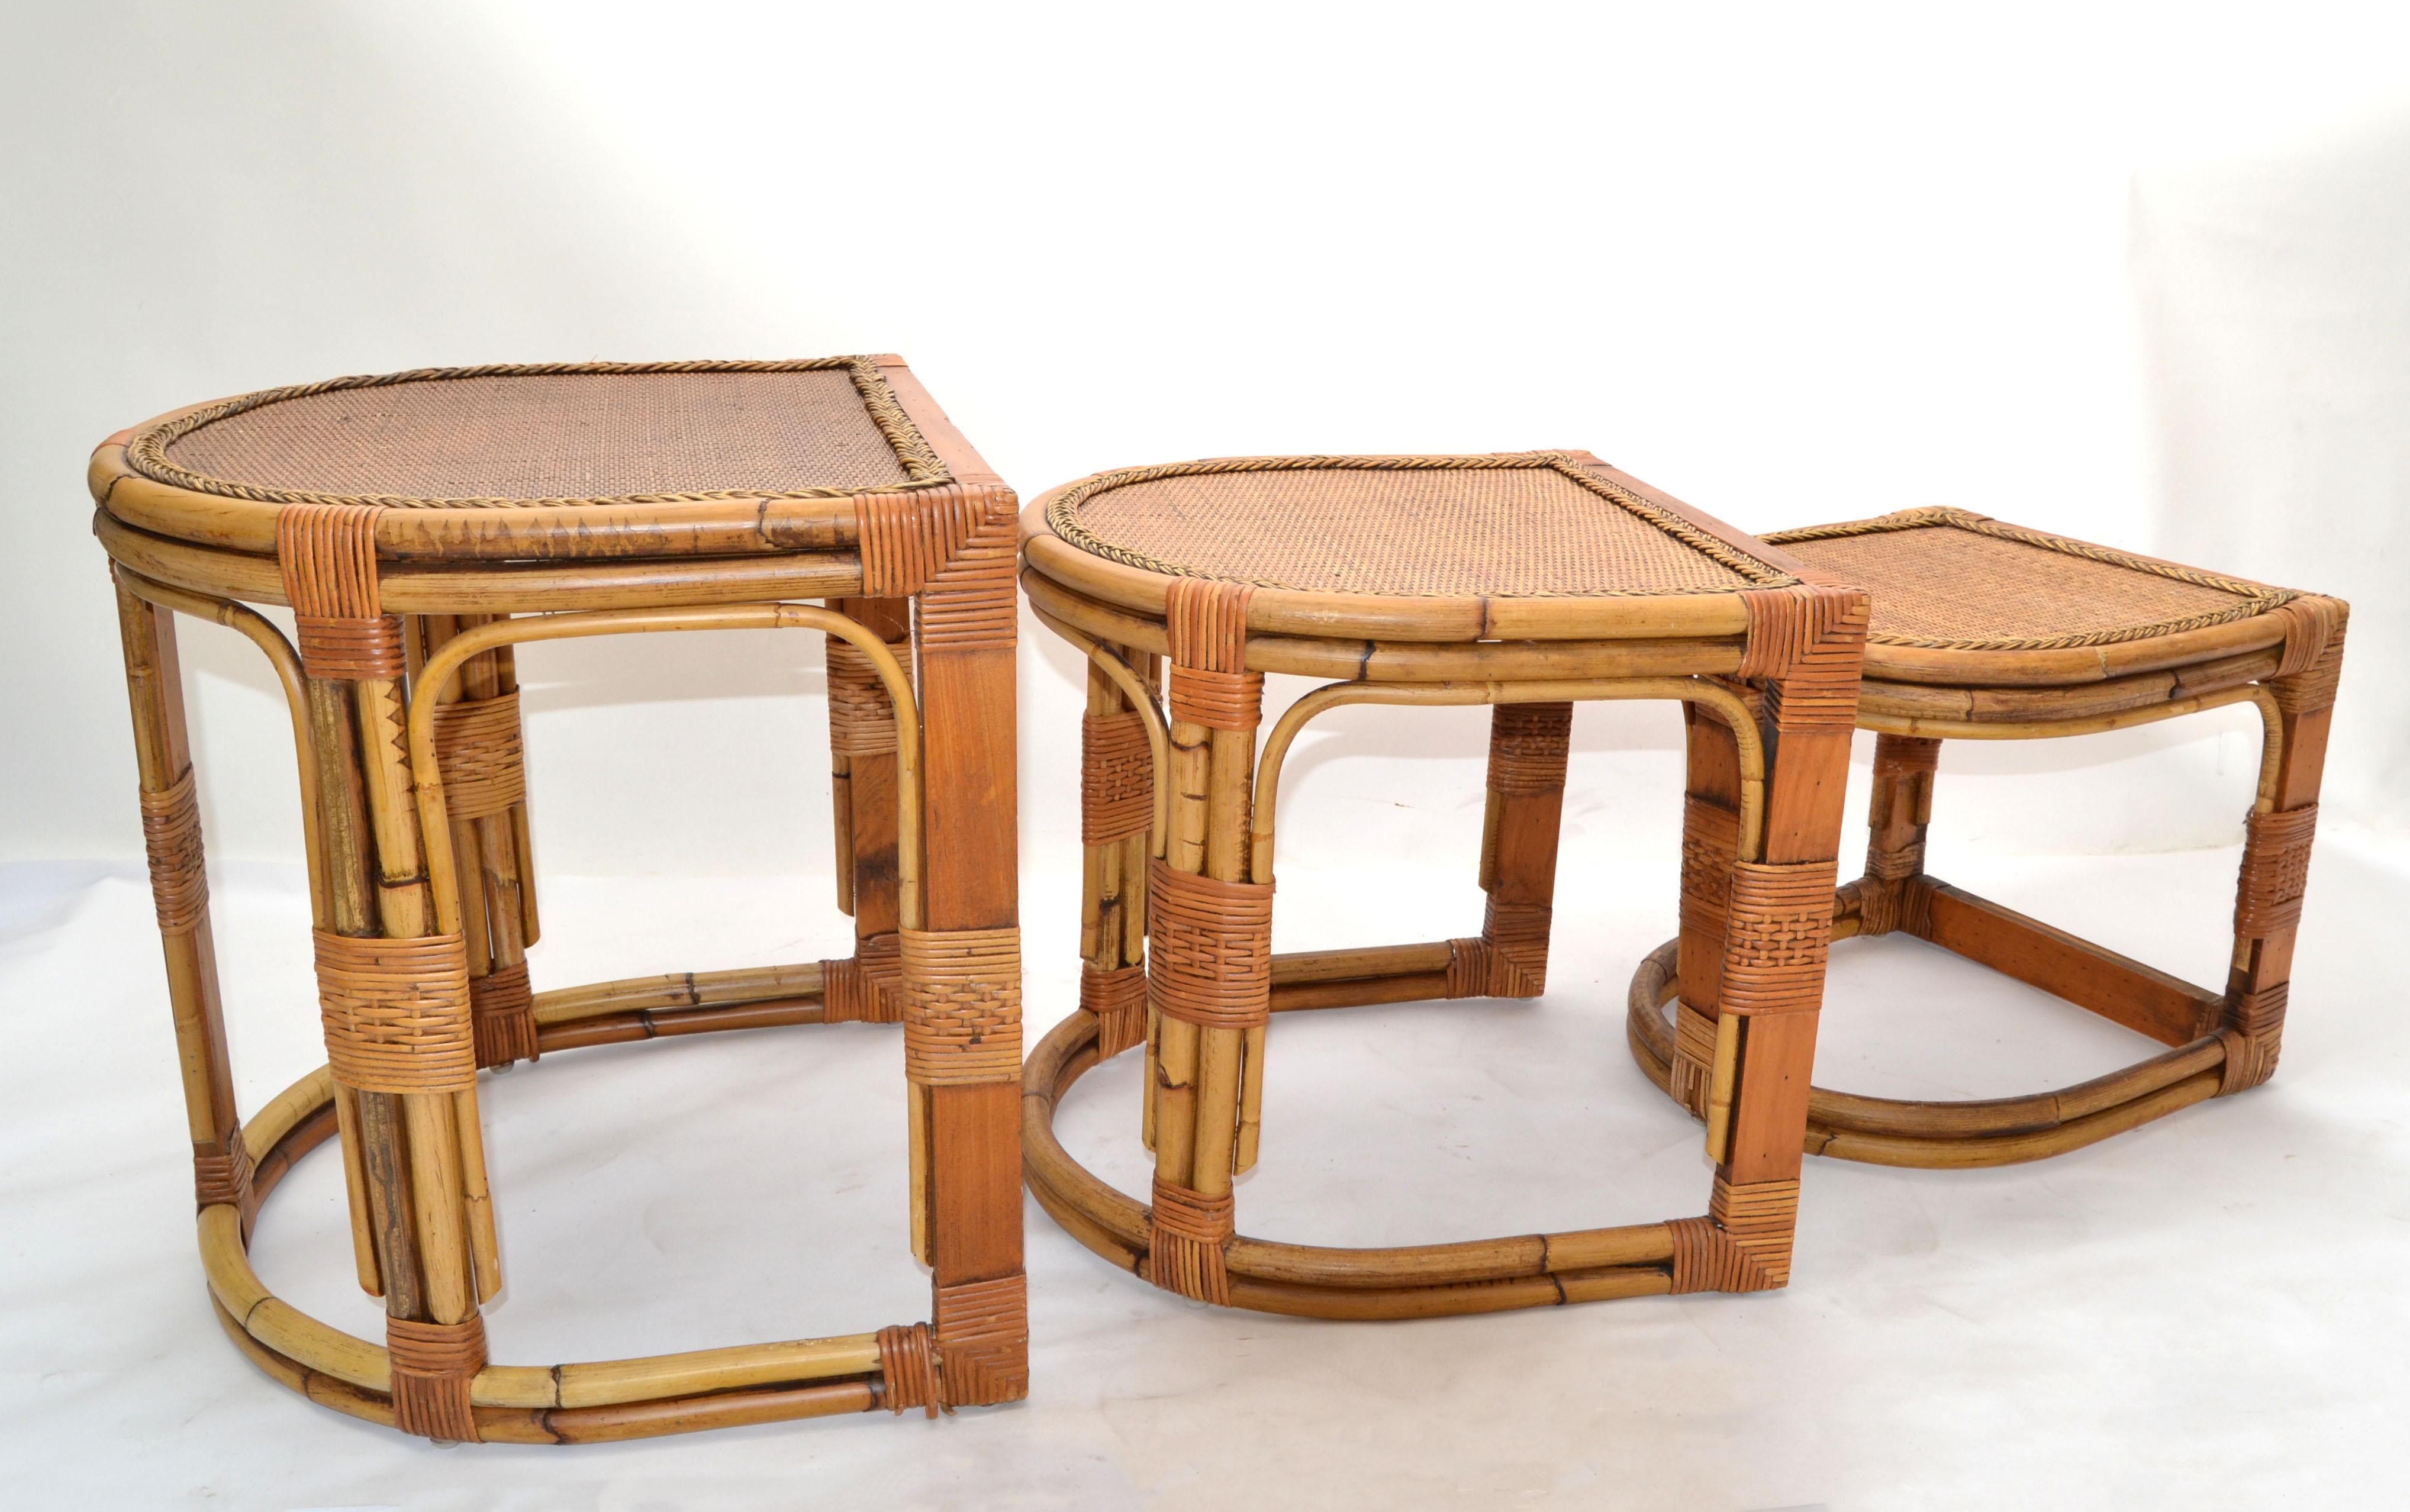 American Semi-Circle Bamboo & Cane Nesting Tables / Stacking Tables Handcrafted, Set of 3 For Sale